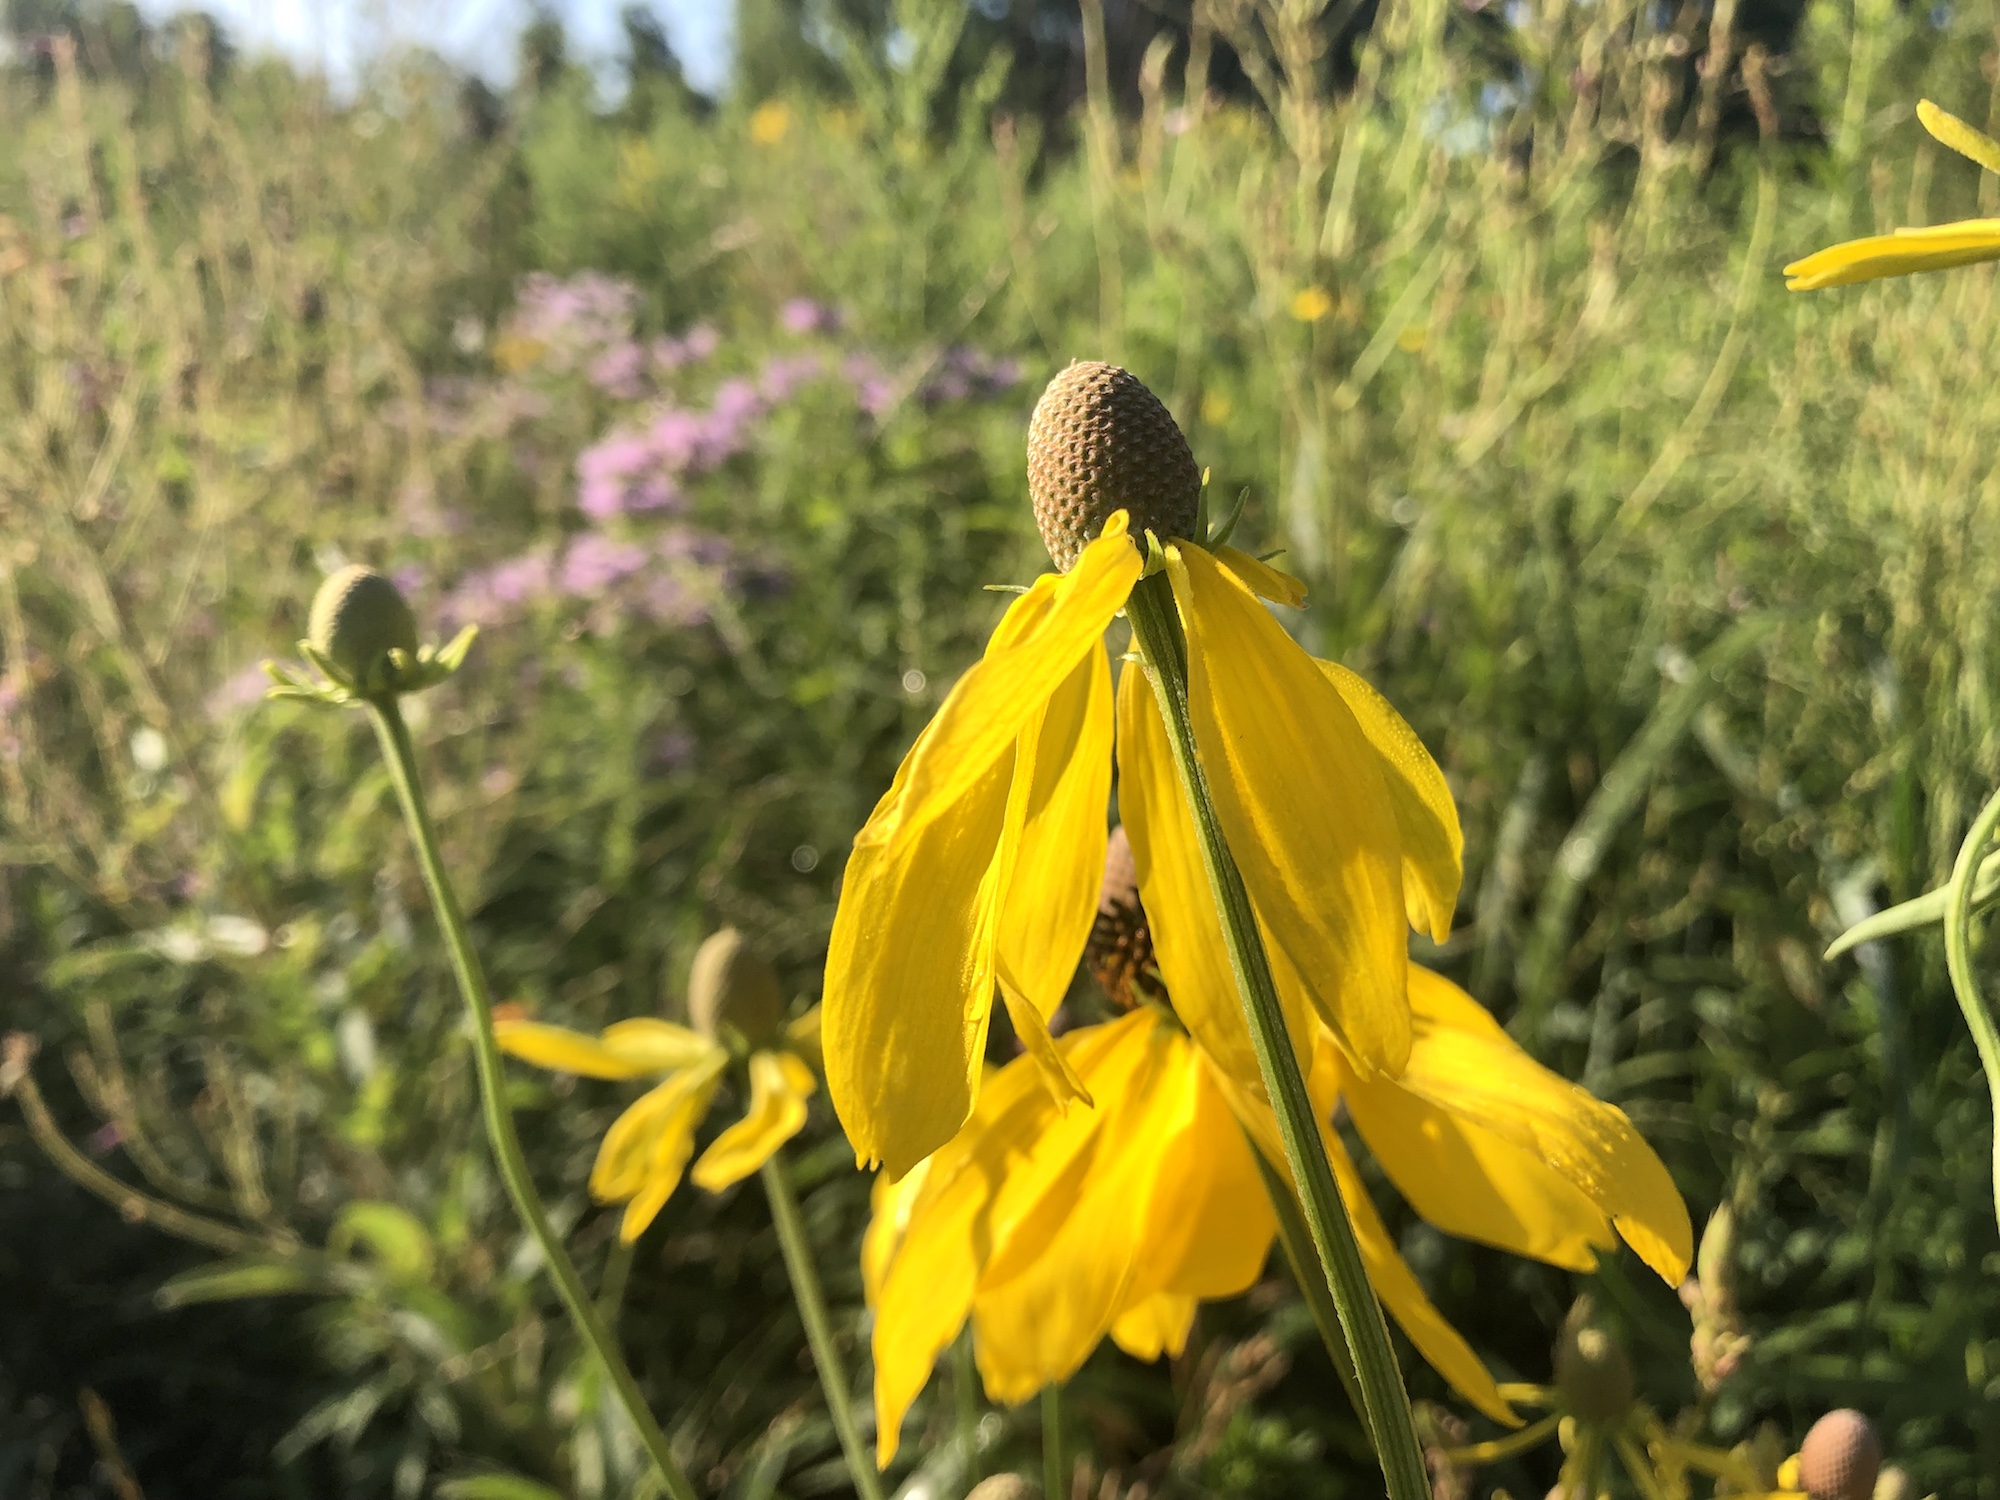 ray-headed coneflower on shore of Retaining Pond in Madison, Wisconsin on July 31, 2019.